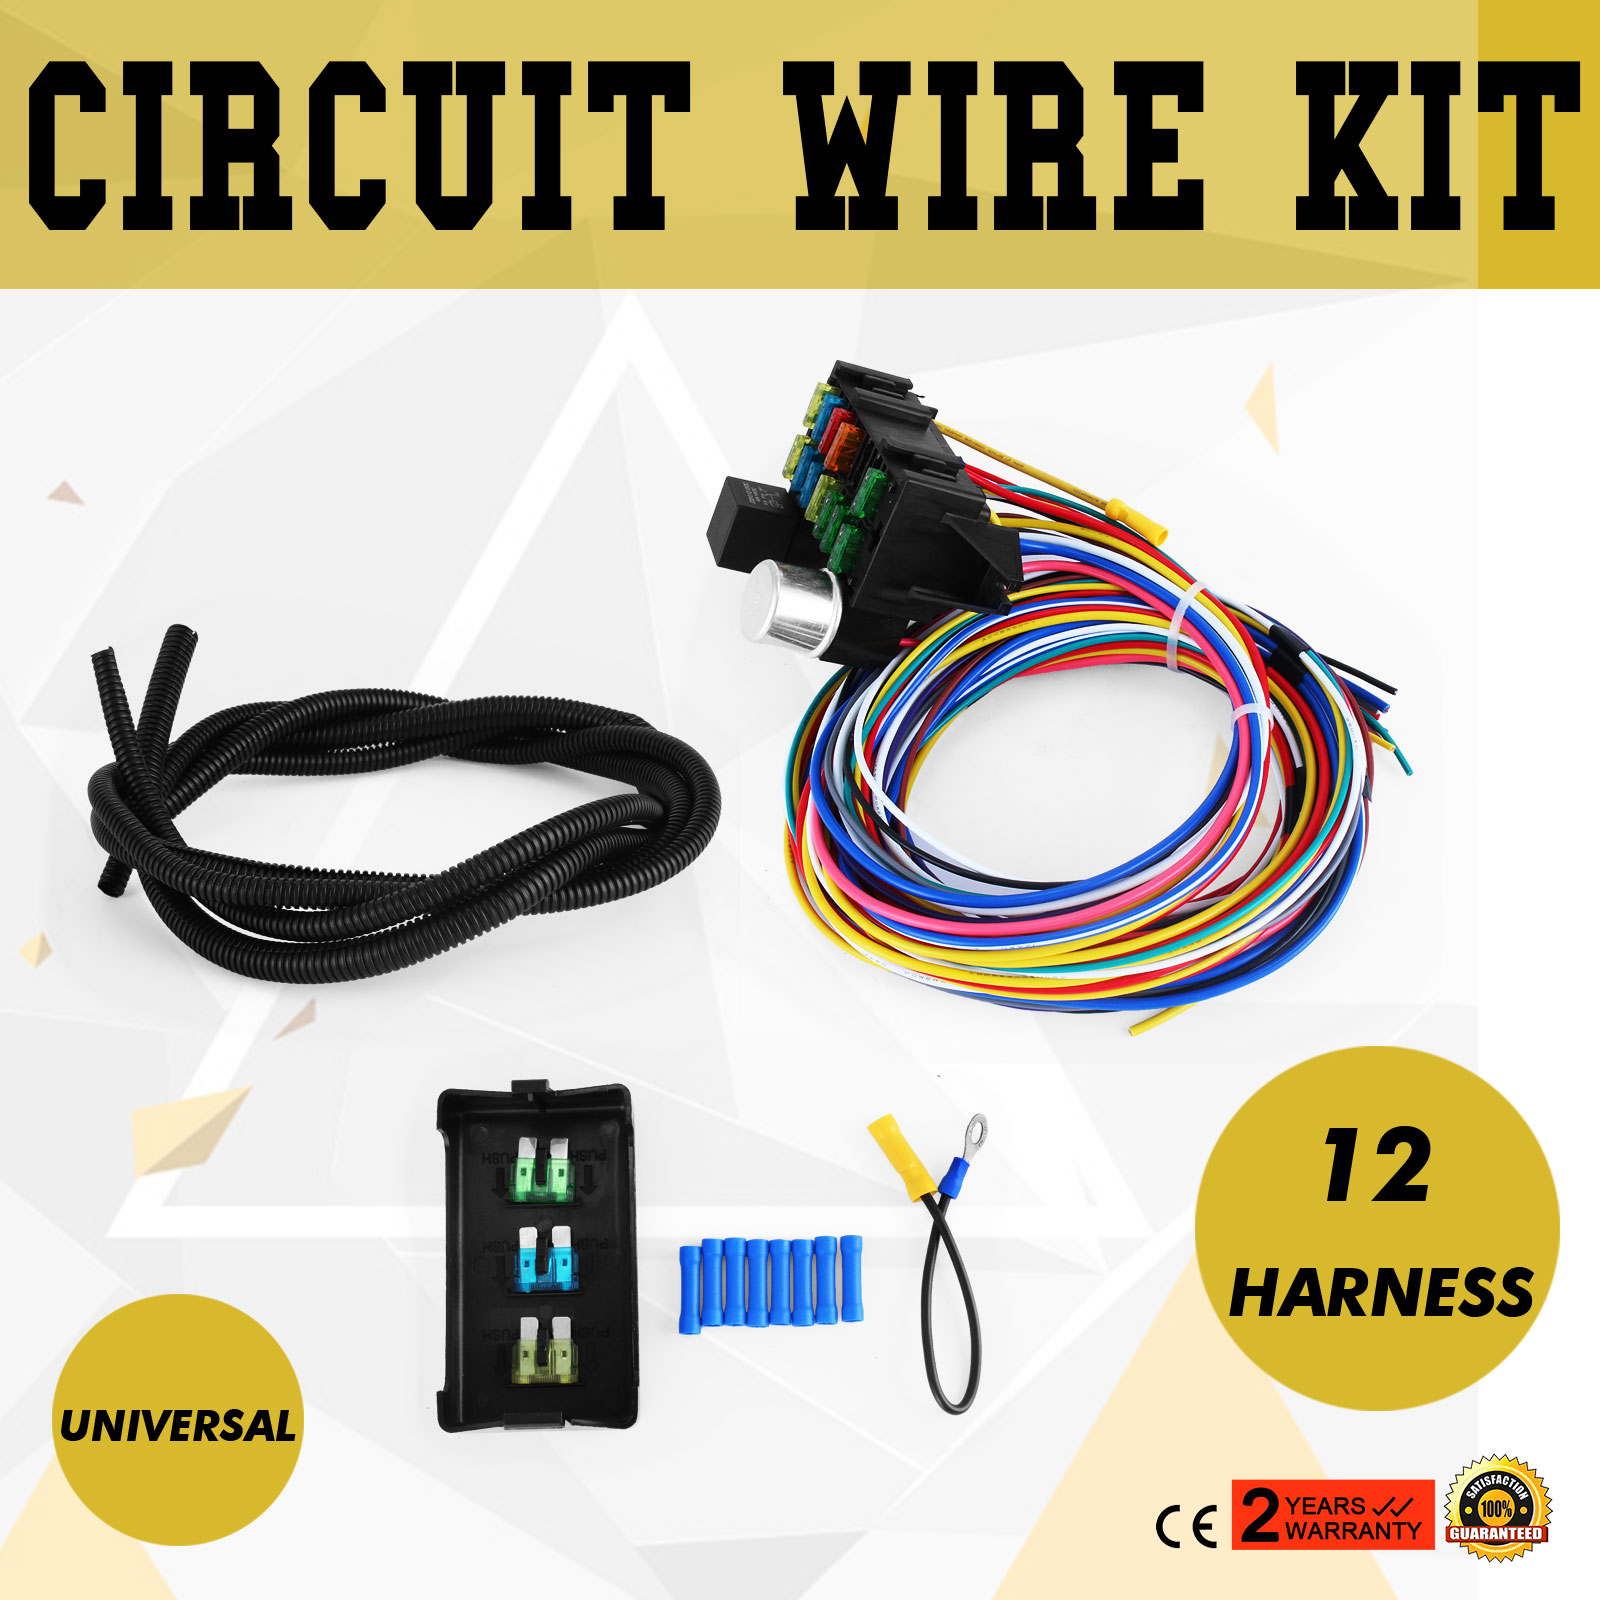 VOVER 12 Circuit universal wire harness muscle car hot rod street rod new XL wires от Vevor Many GEOs